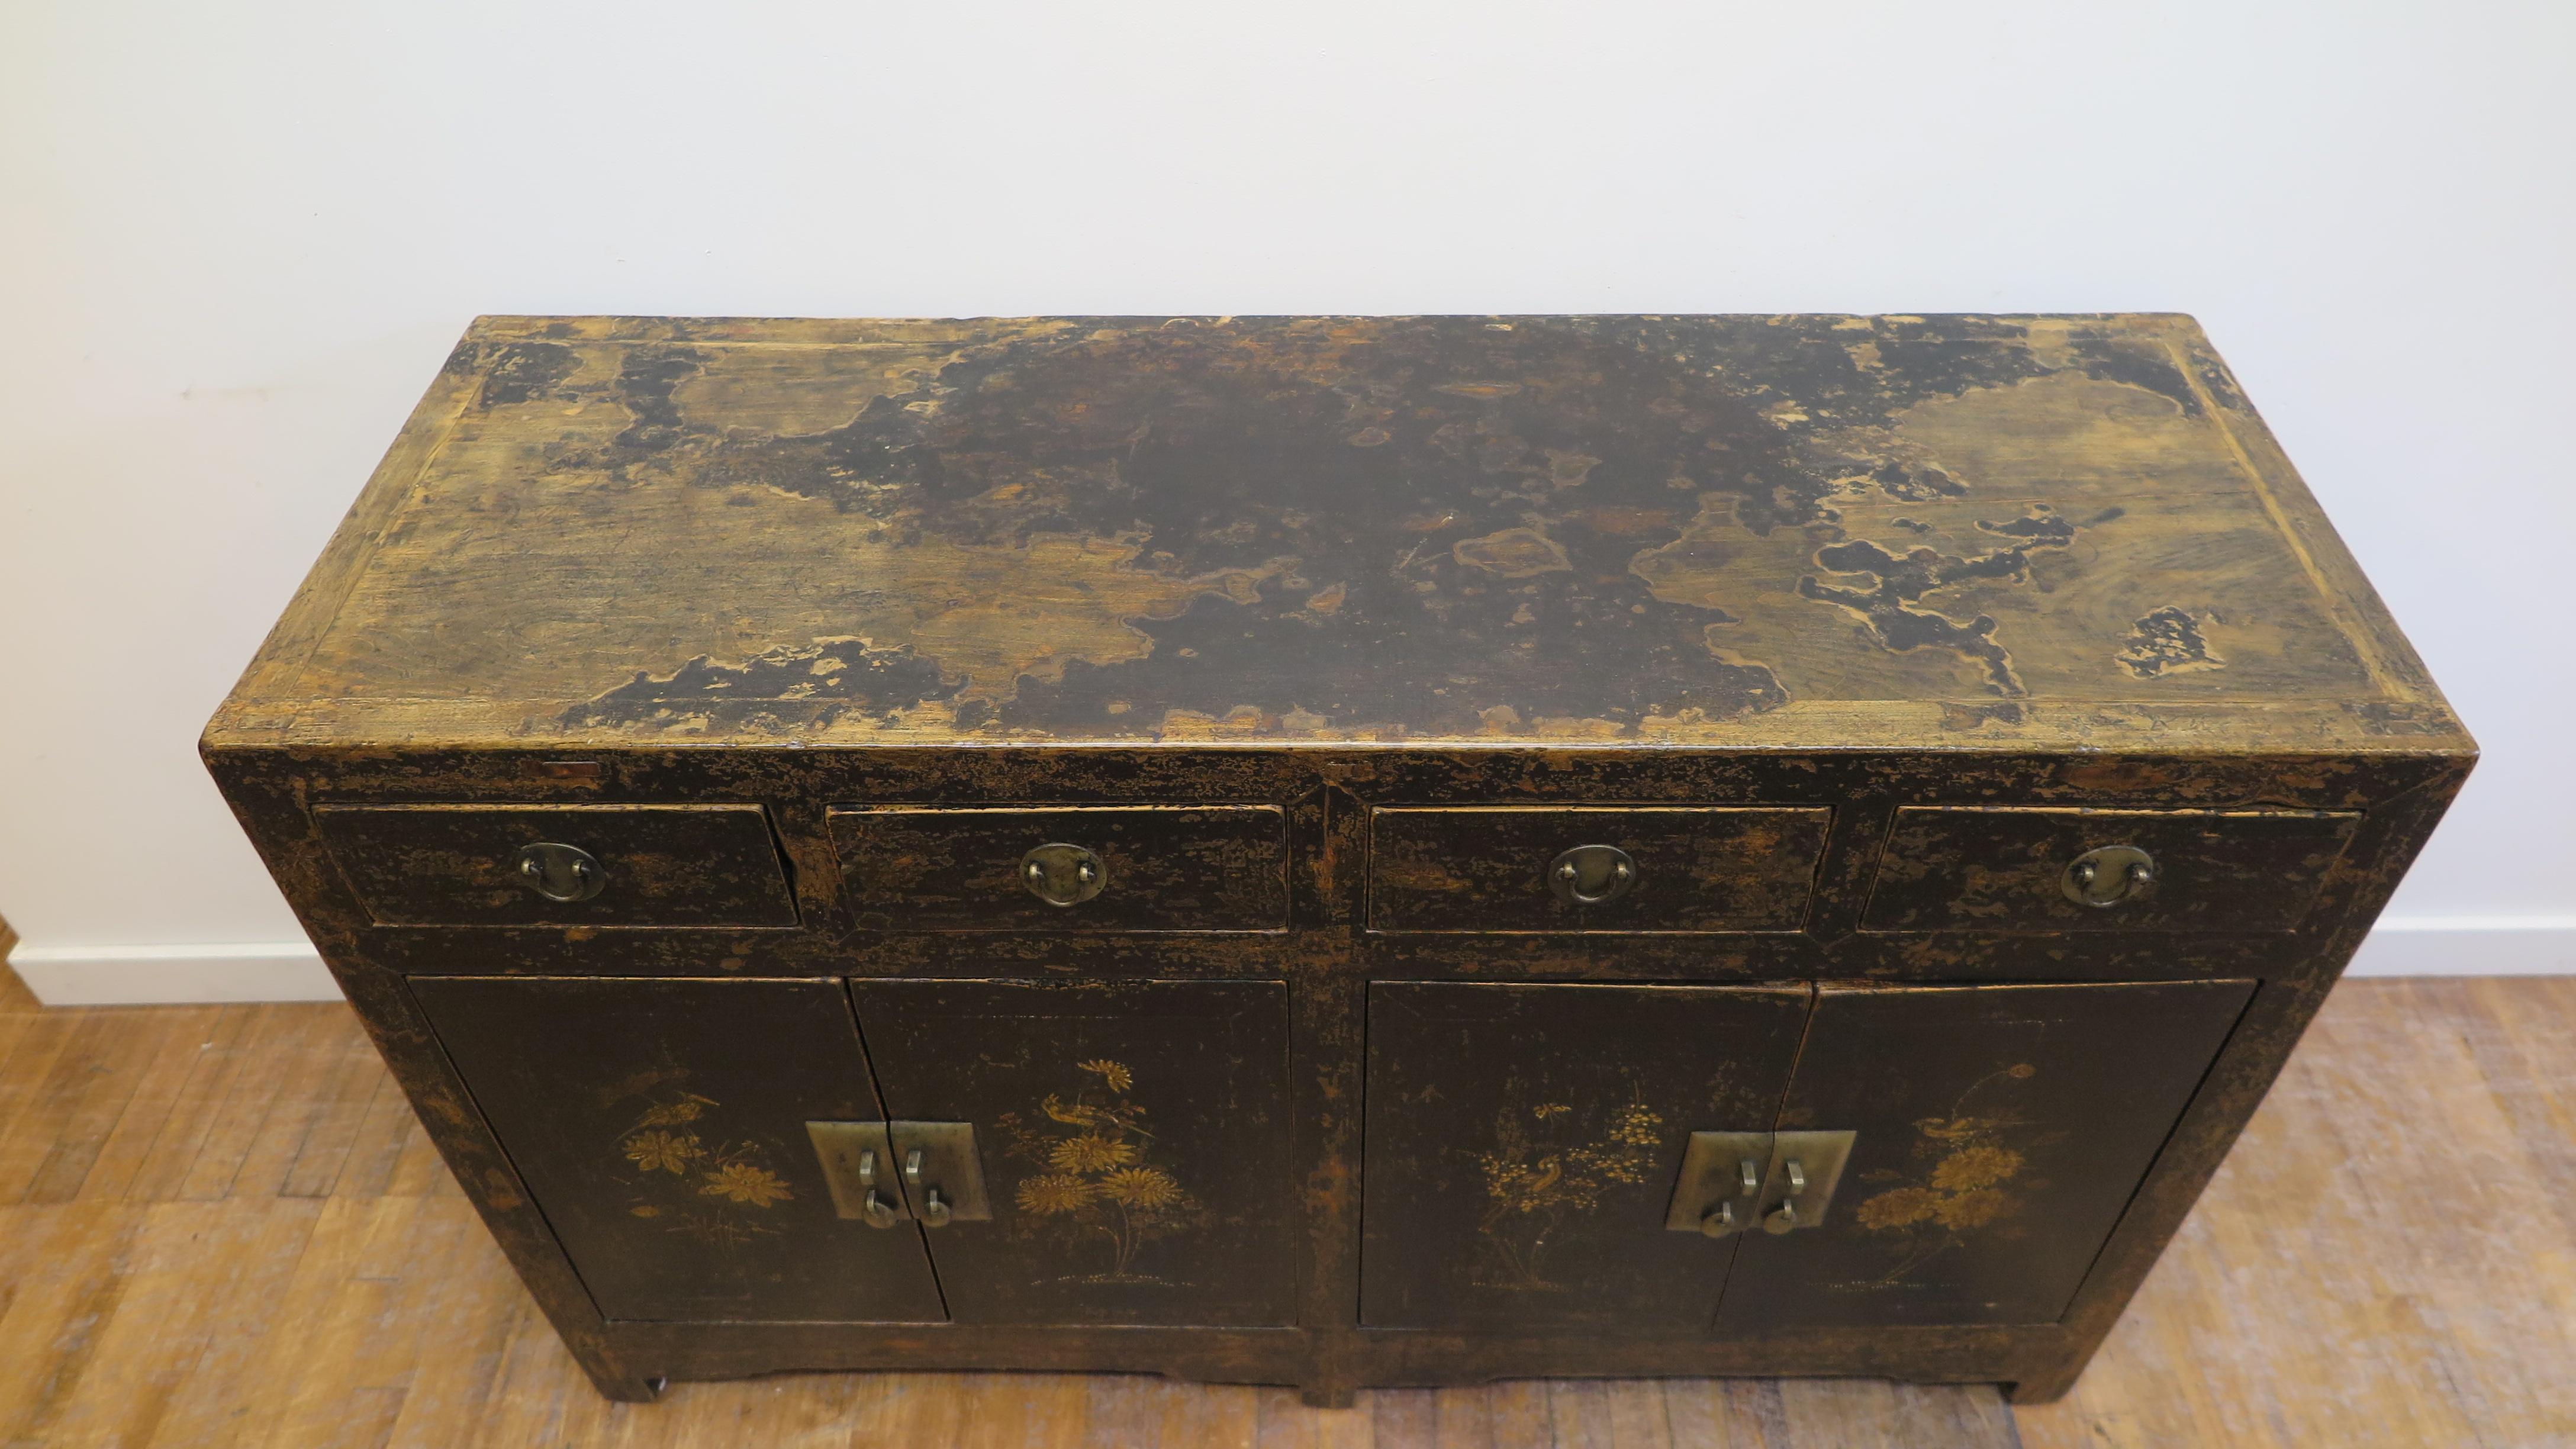 Antique Chinese sideboard 19th century from Shanxi China. Worn black lacquer sideboard with painting having a spectacular time endured patina. Paint work depicting seasonal flowers and birds. Very good condition with significant patina and original